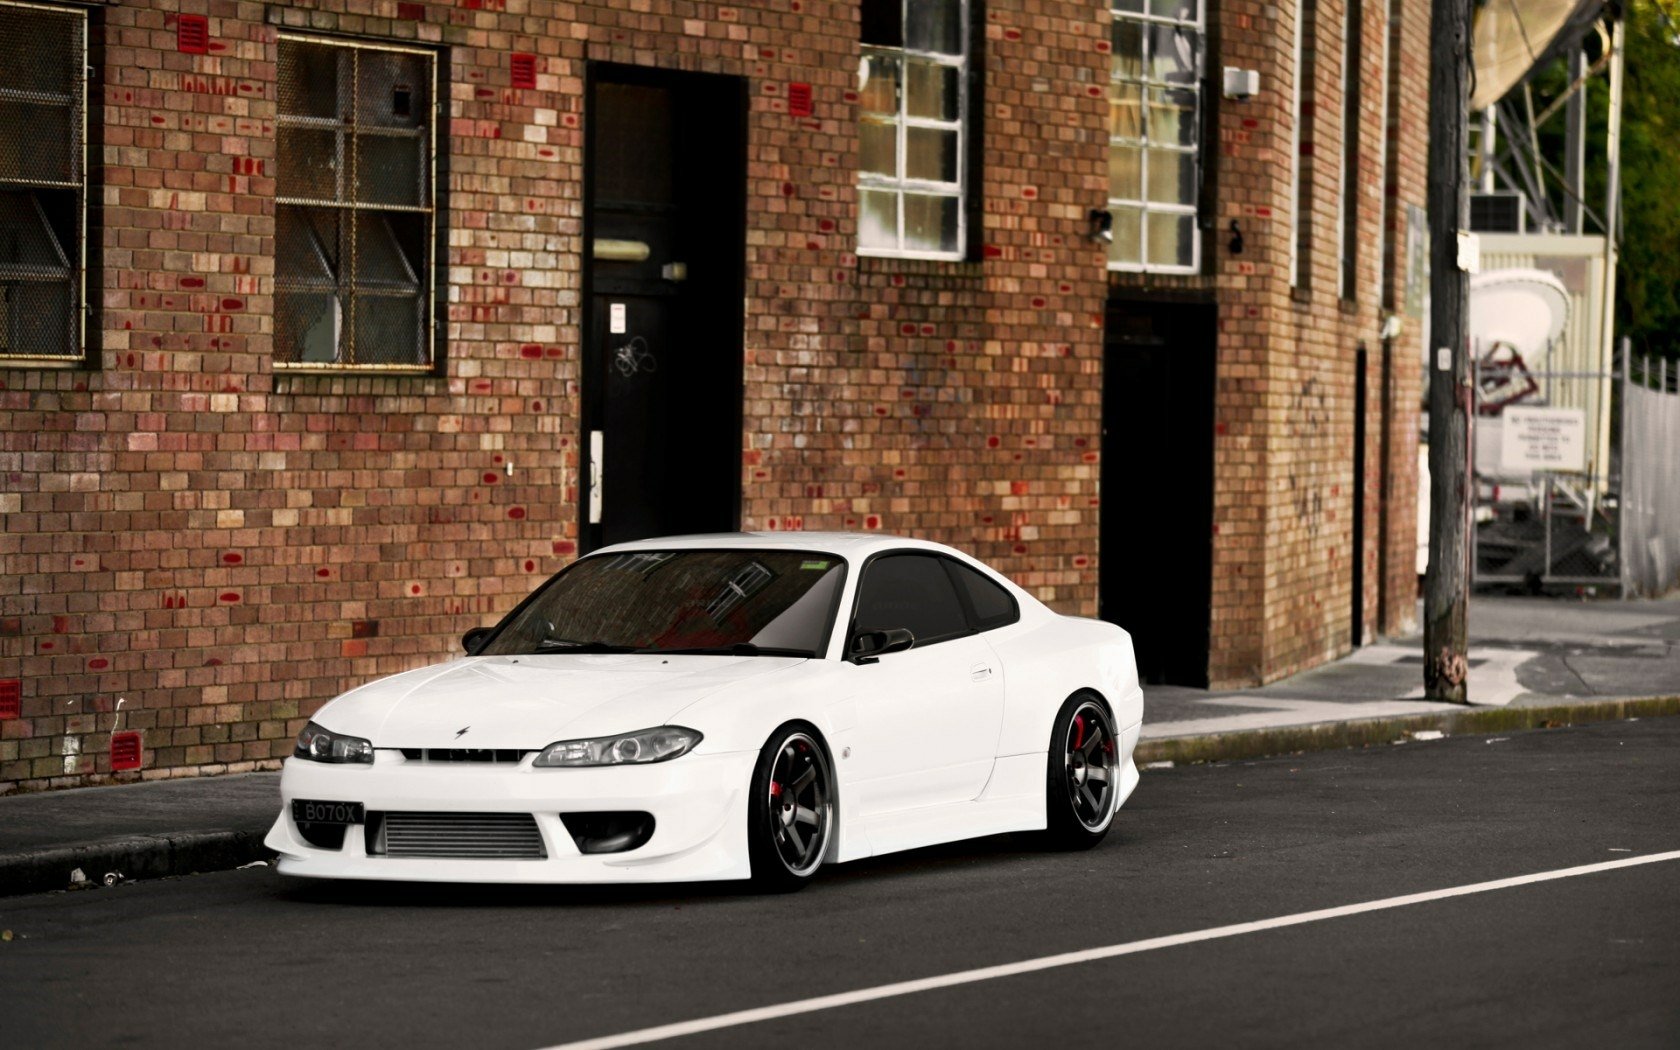 Nissan Silvia S15 Wallpaper And Background Image 1680x1050